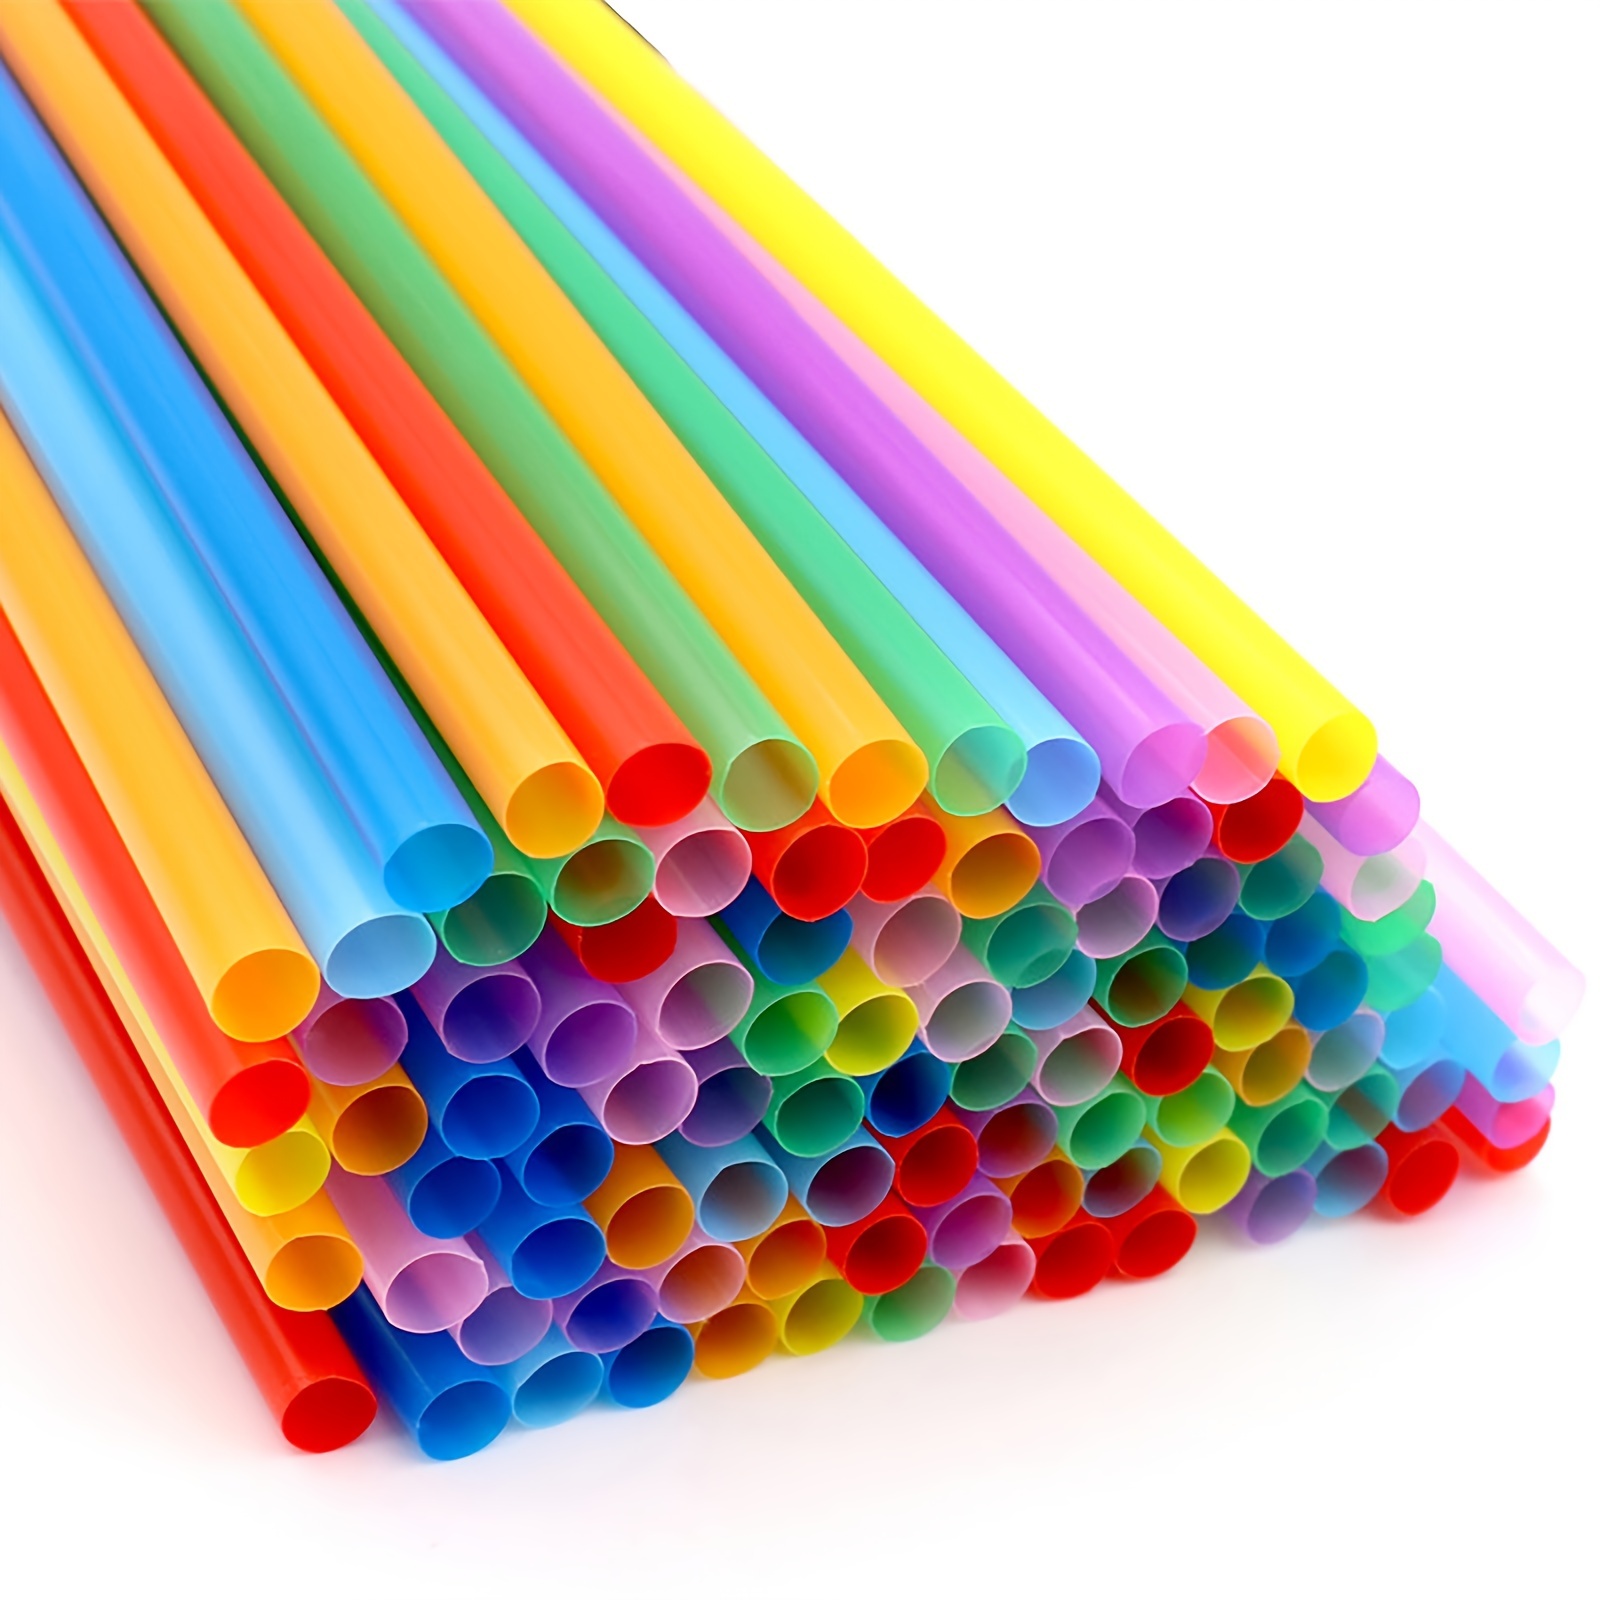 Bendable Straws with Straw Covers Cap - 11 inch Long Flexible Straws -  Bendy Drinking Straws Reusable with Covers Cap Assorted Colors - 14 Pack